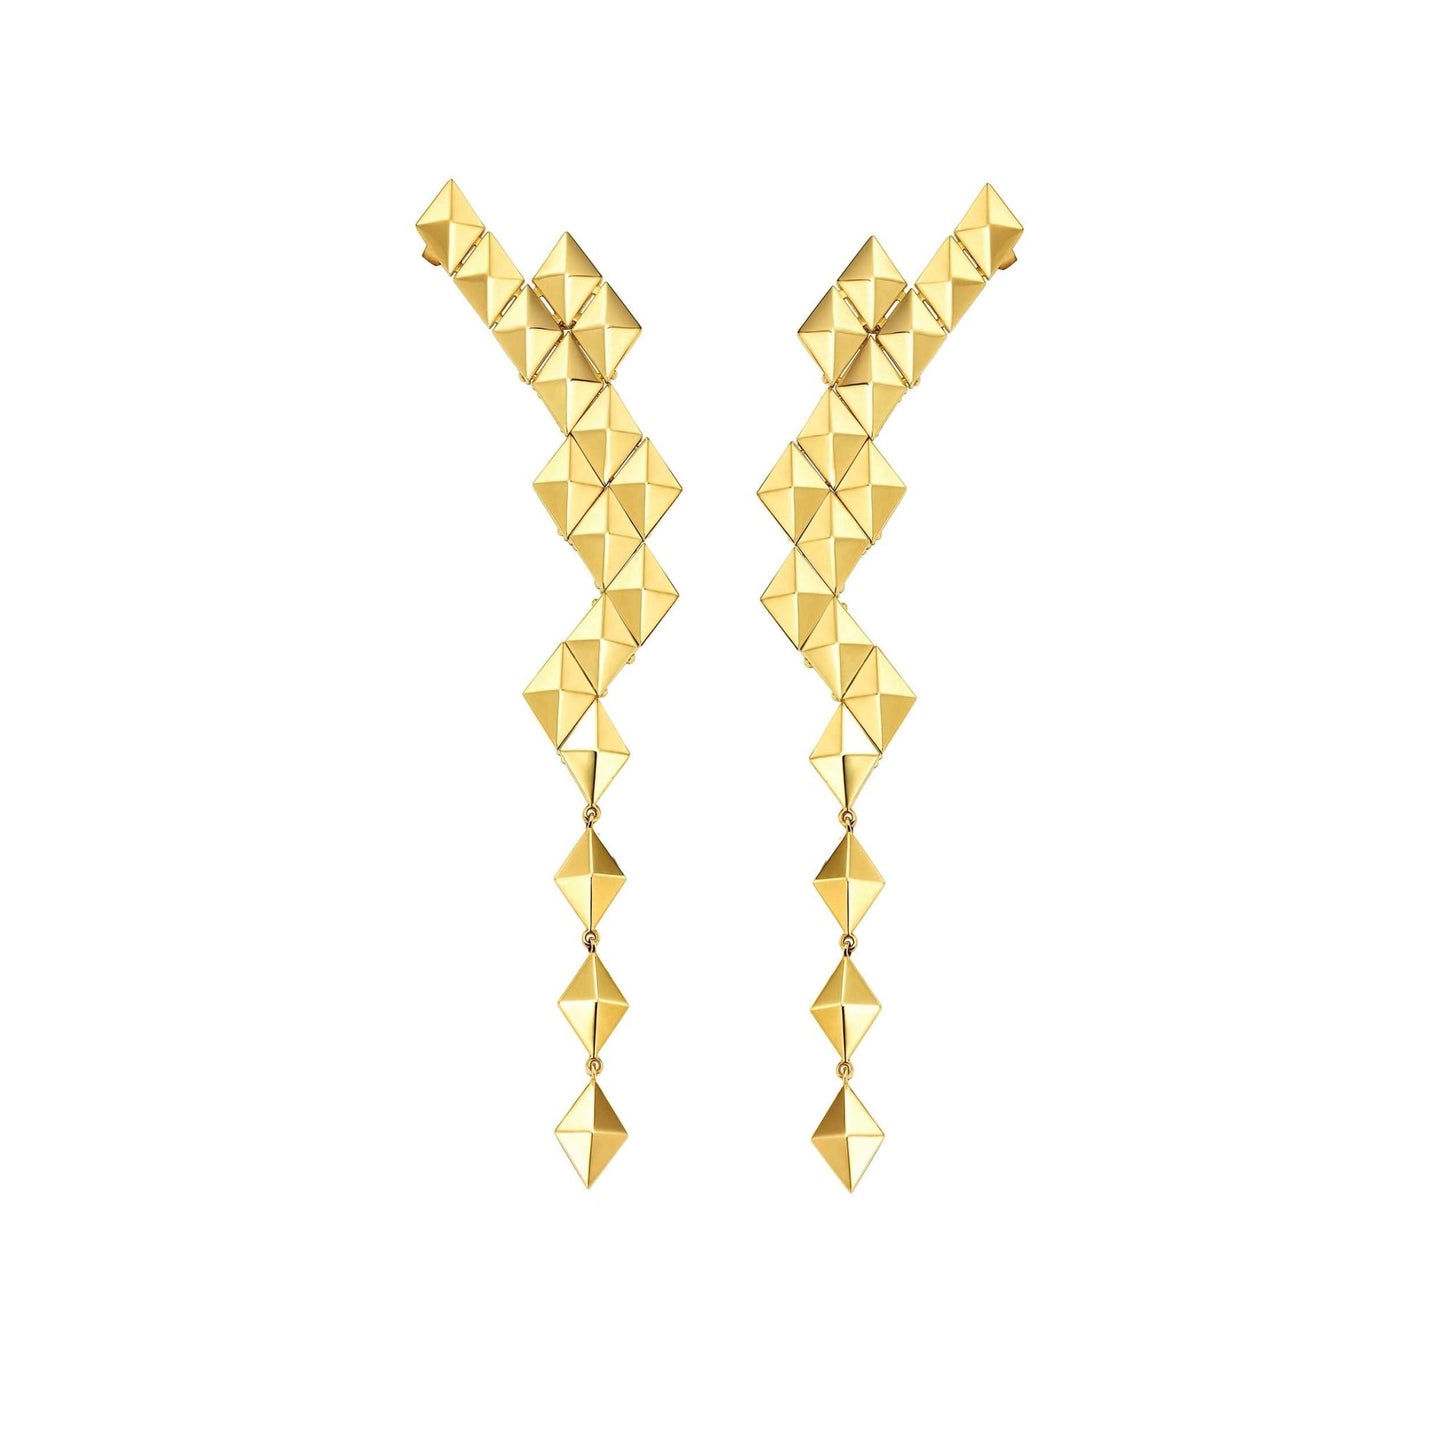 Large Yellow Gold Python Clip On Earring Climbers - Cadar